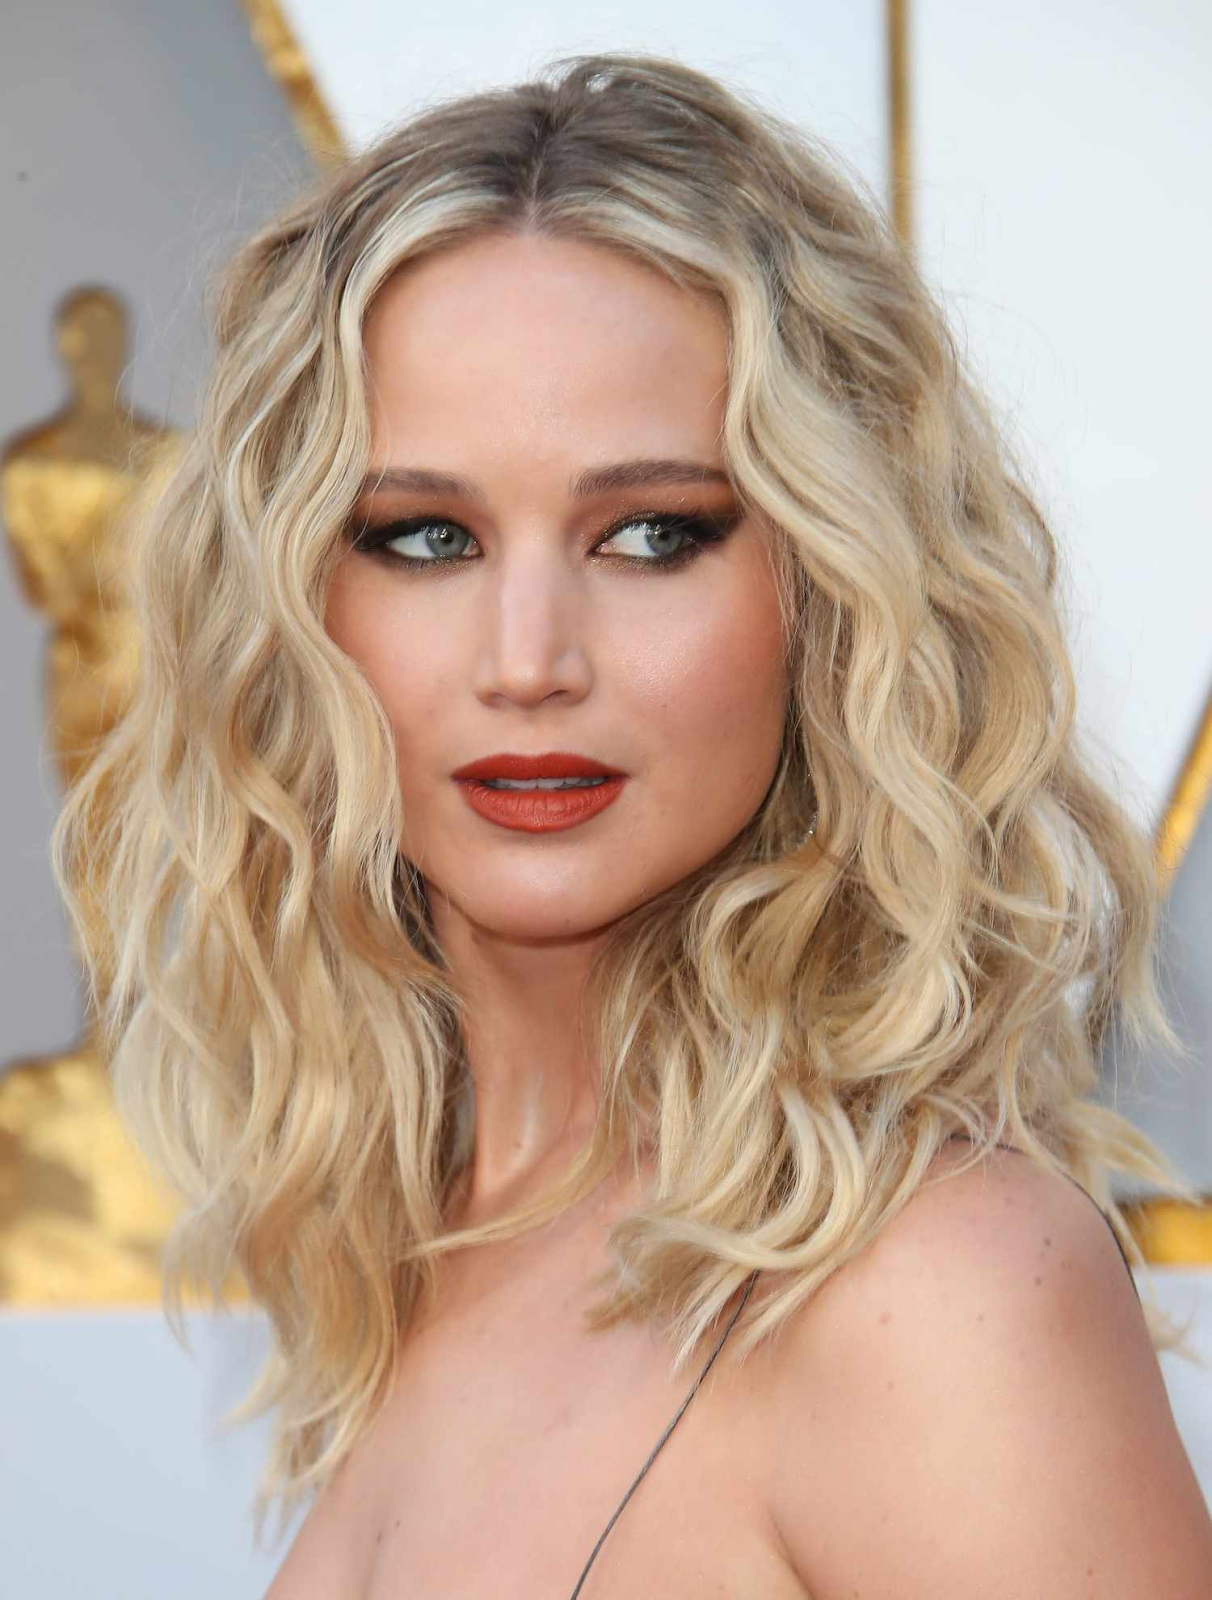 Hairstylists' Picks for the 8 Best Blonde Hair Colors for 2023 7